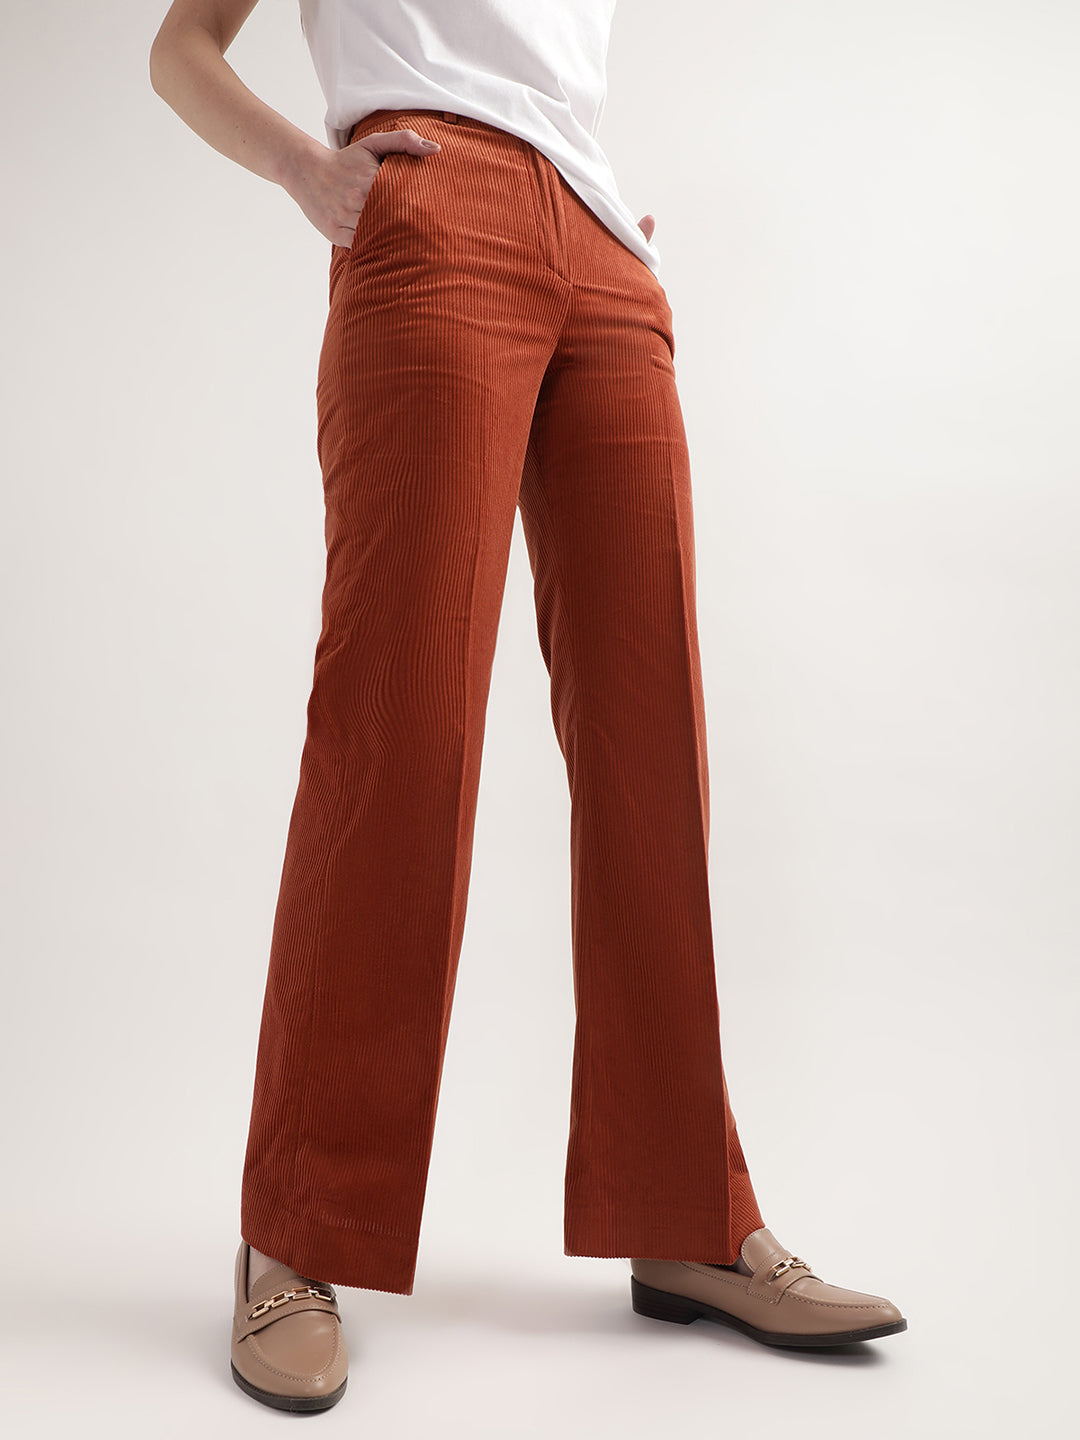 Gant Women Rust Striped Cotton Straight Fit Bootcut Trousers